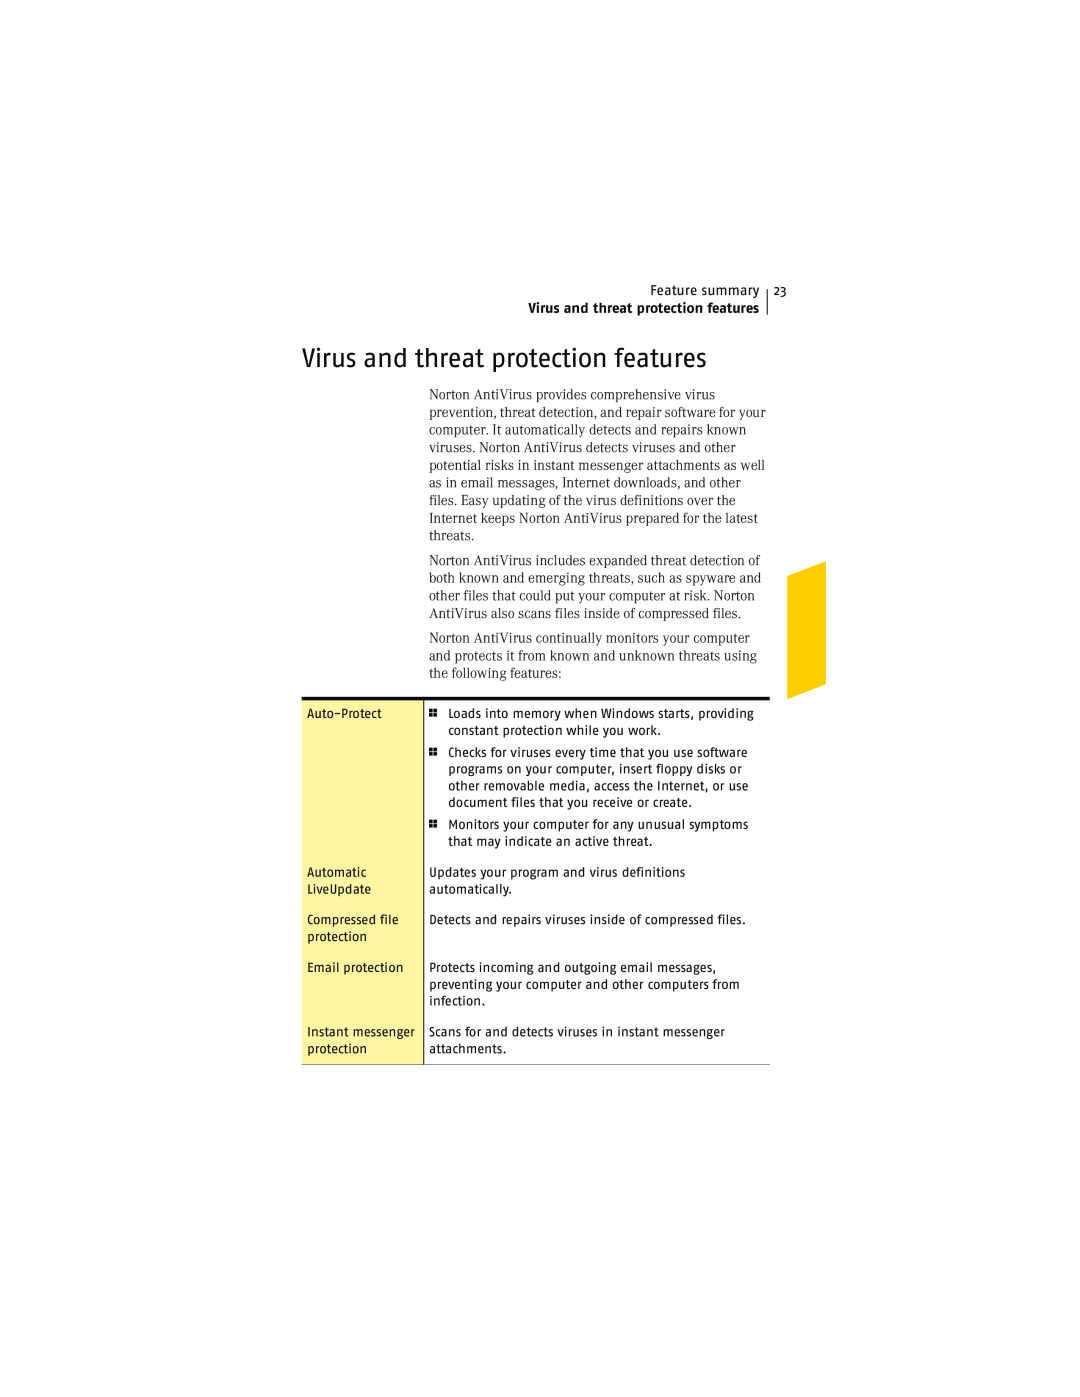 Symantec NIS2005 manual Virus and threat protection features, Feature summary 